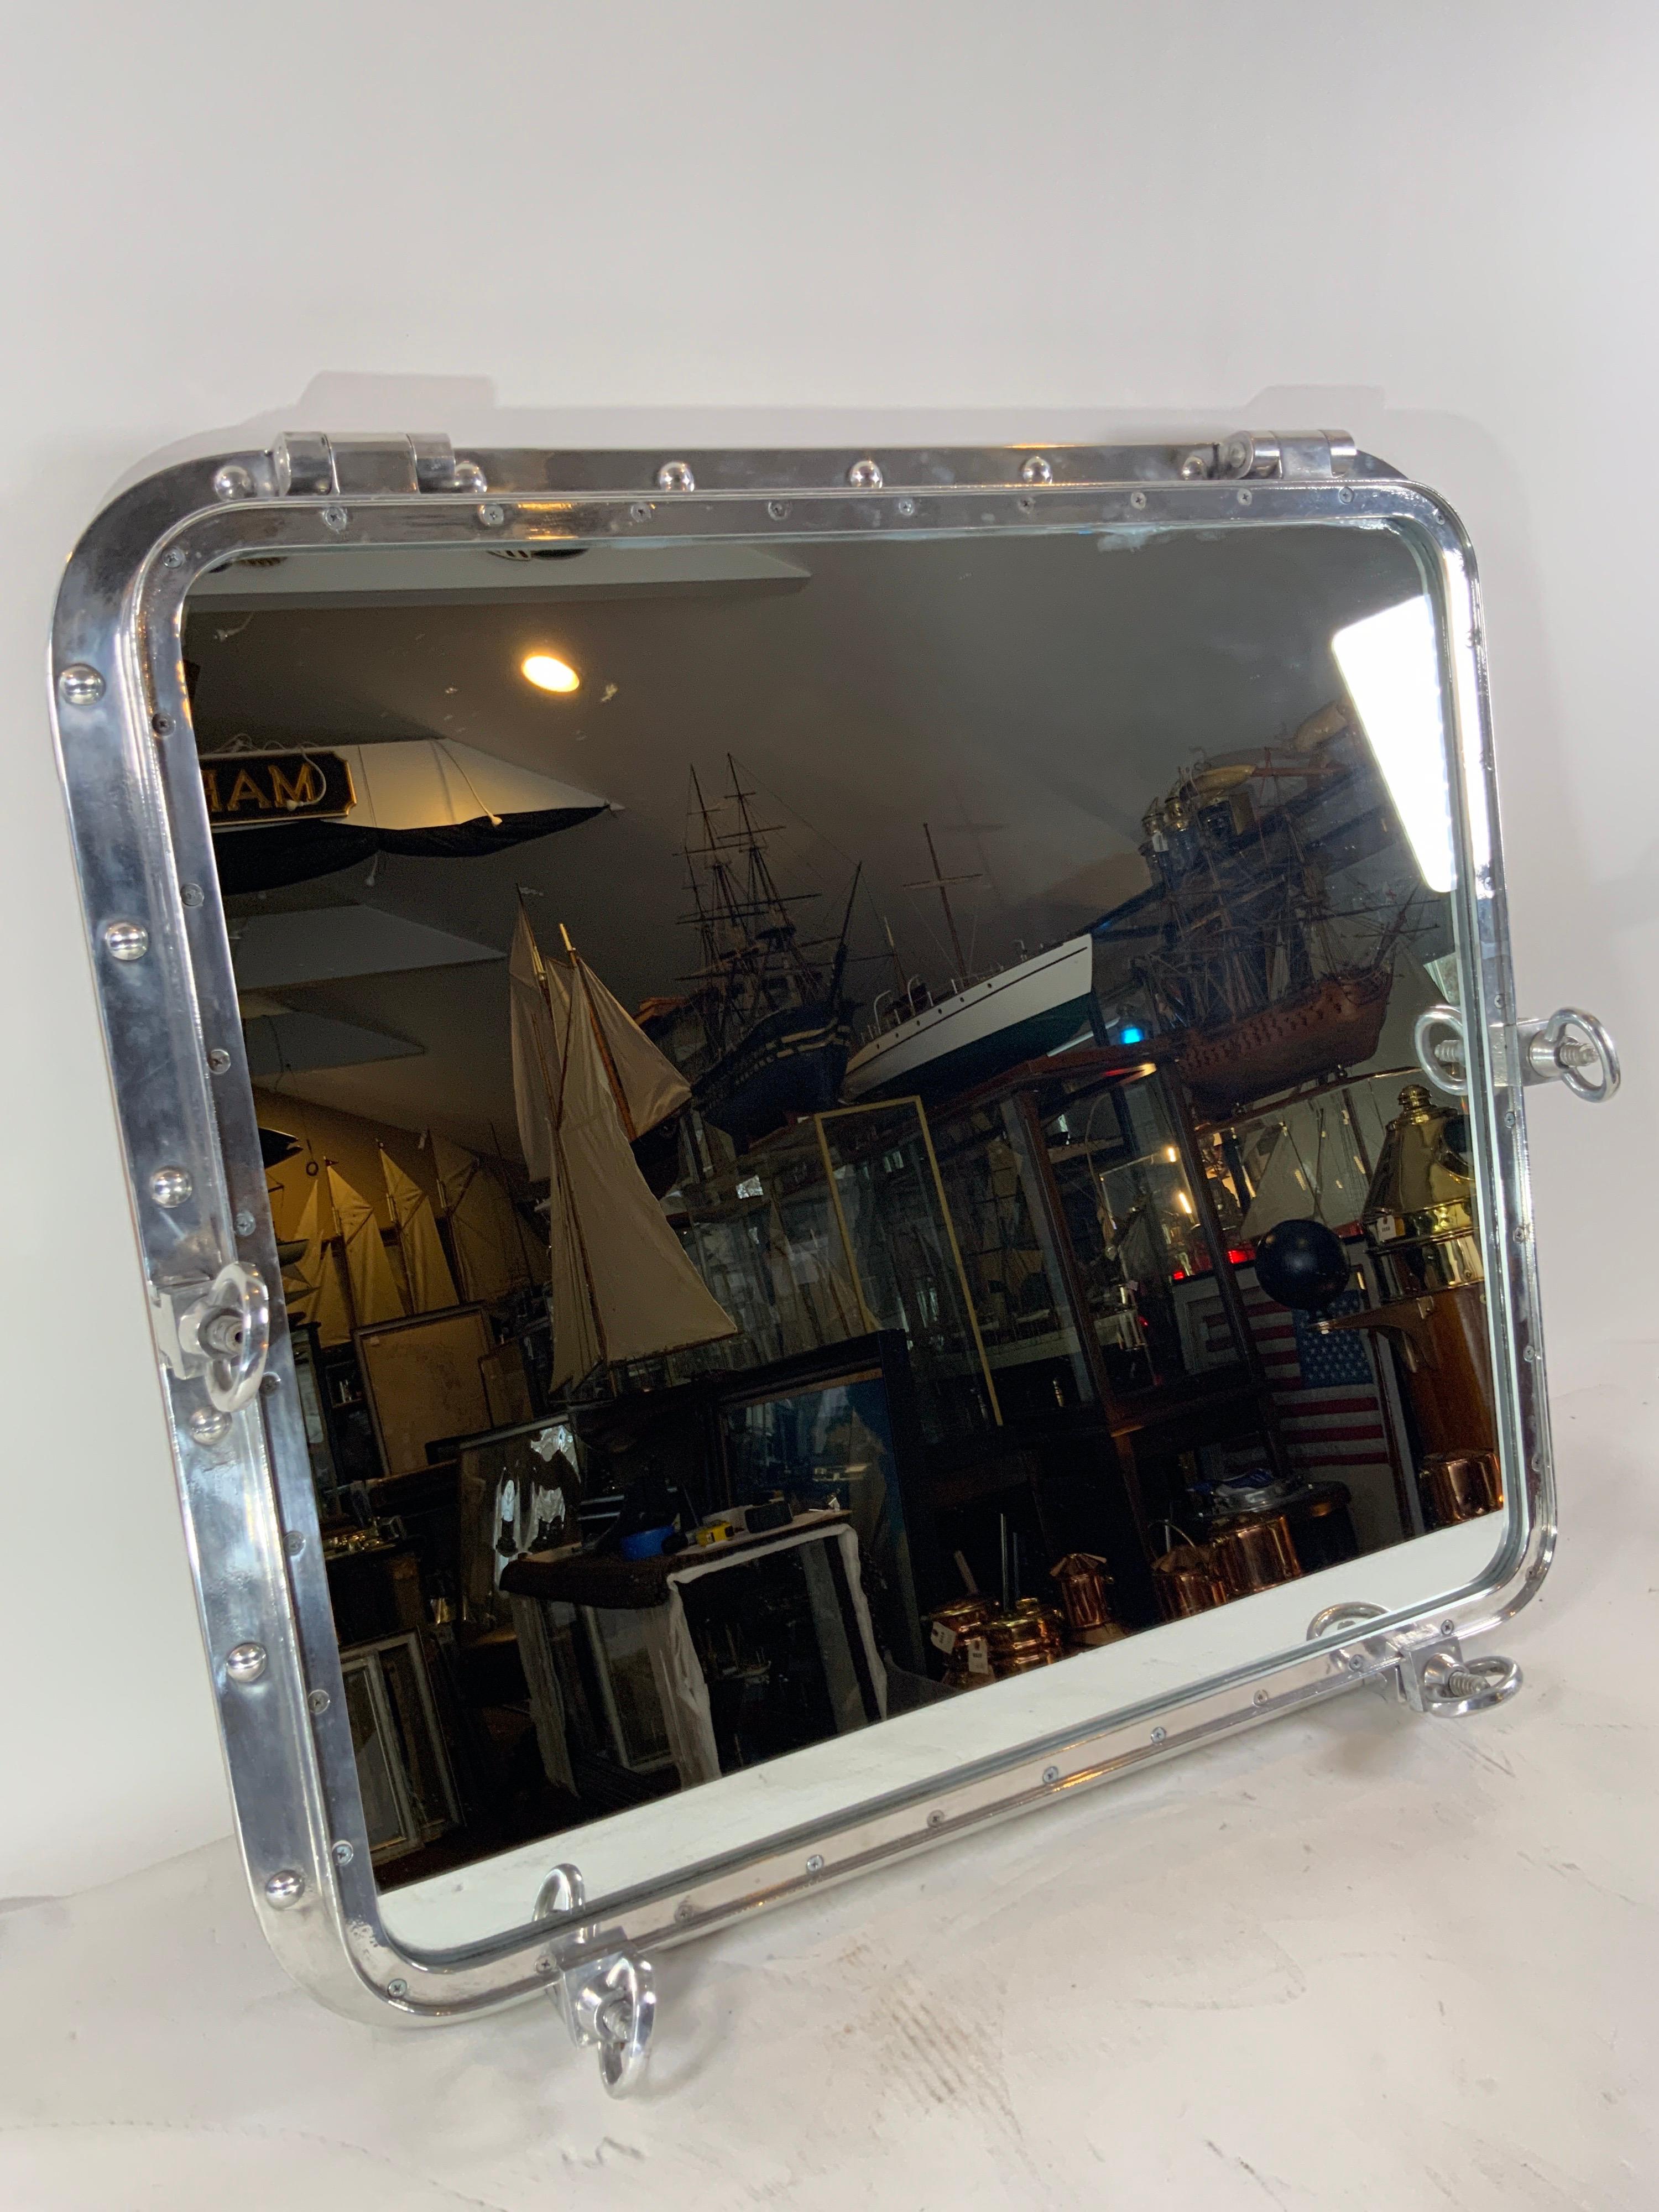 Very large highly polished aluminum ship's porthole mirror with teakwood strip around back edge. Glass mirror is fitted to frame.

Overall Dimensions: 36